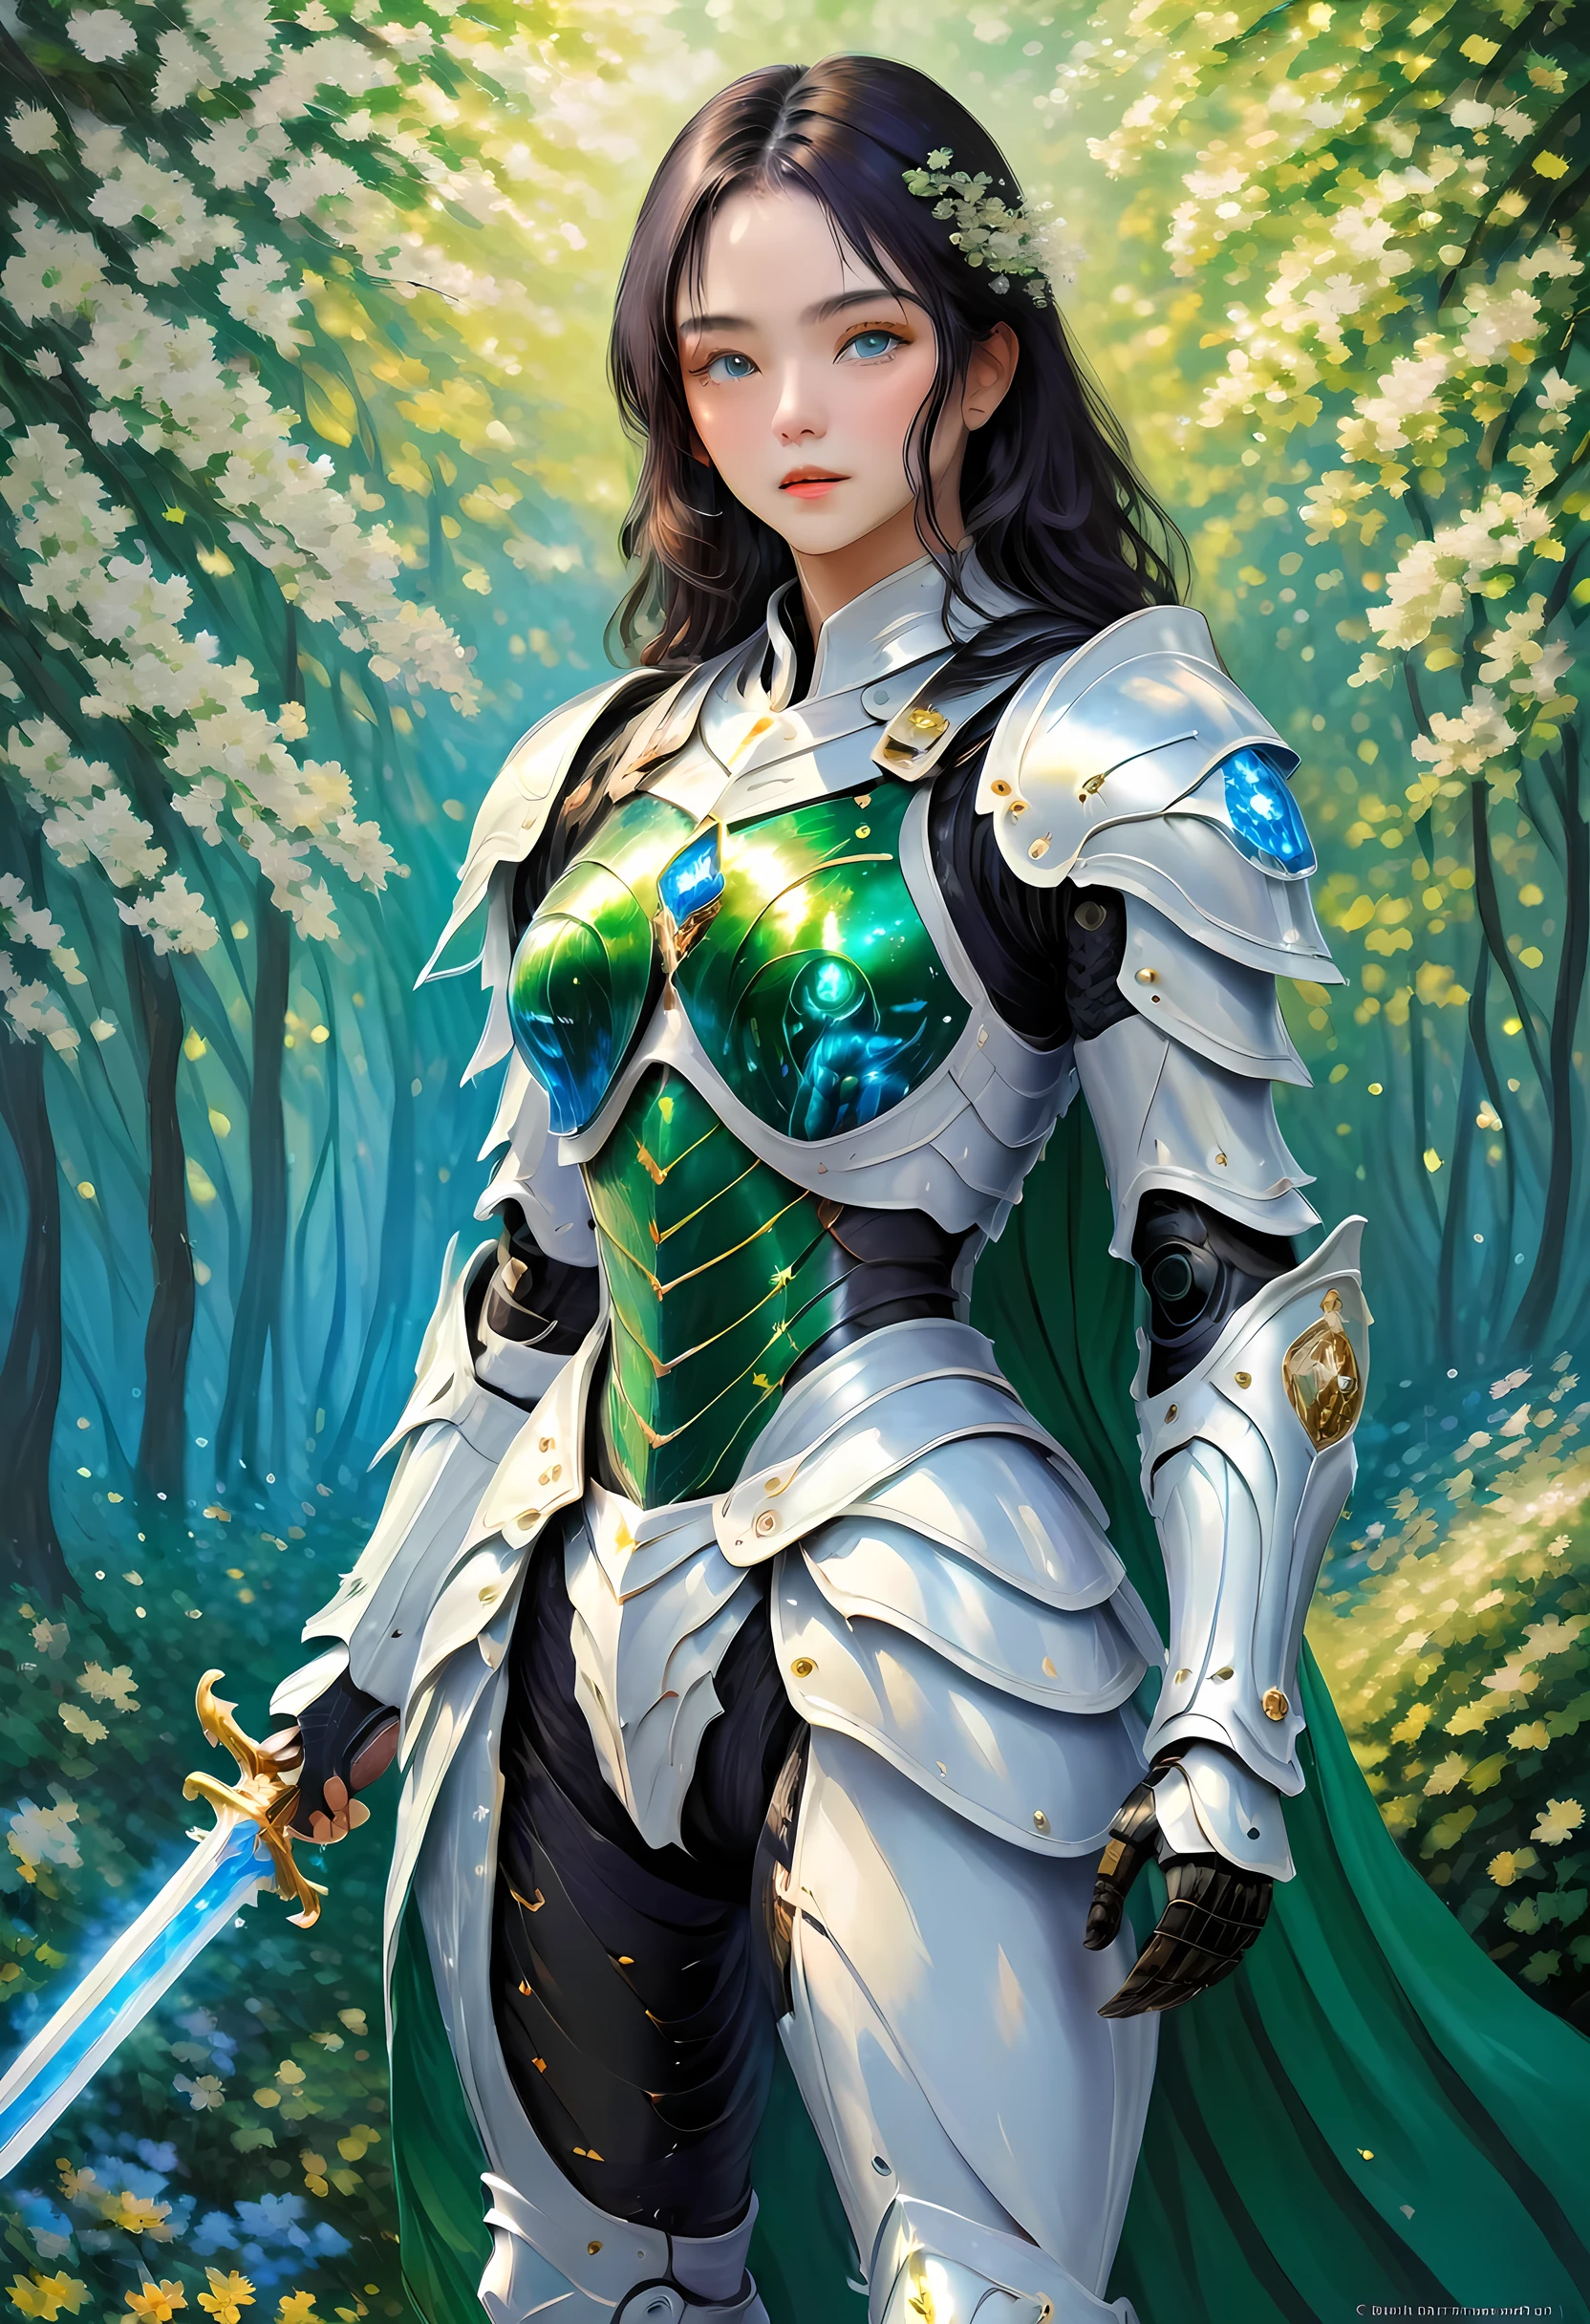 (Claude Monet Style:1.5) Claude_Monet style painting, a picture of woman paladin of nature protecting the forest, a woman knight, black hair, long hair, full body (best details, Masterpiece, best quality :1.5), ultra detailed face (best details, Masterpiece, best quality :1.5), ultra feminine (best details, Masterpiece, best quality :1.5), black hair, long hair, braided hair, pale skin, (deep blue: 1.2) eyes, intense eyes, wearying heavy armor, white armor (best details, Masterpiece, best quality :1.5), green cloak, armed with a sword, glowing sword GlowingRunes_green, fantasy forest background, D&D art, RPG art, magical atmosphere magic-fantasy-forest, ultra best realistic, best details, best quality, 16k, [ultra detailed], masterpiece, best quality, (extremely detailed), ultra wide shot, photorealism, depth of field, hyper realistic painting, cybrk, RagingNebula
